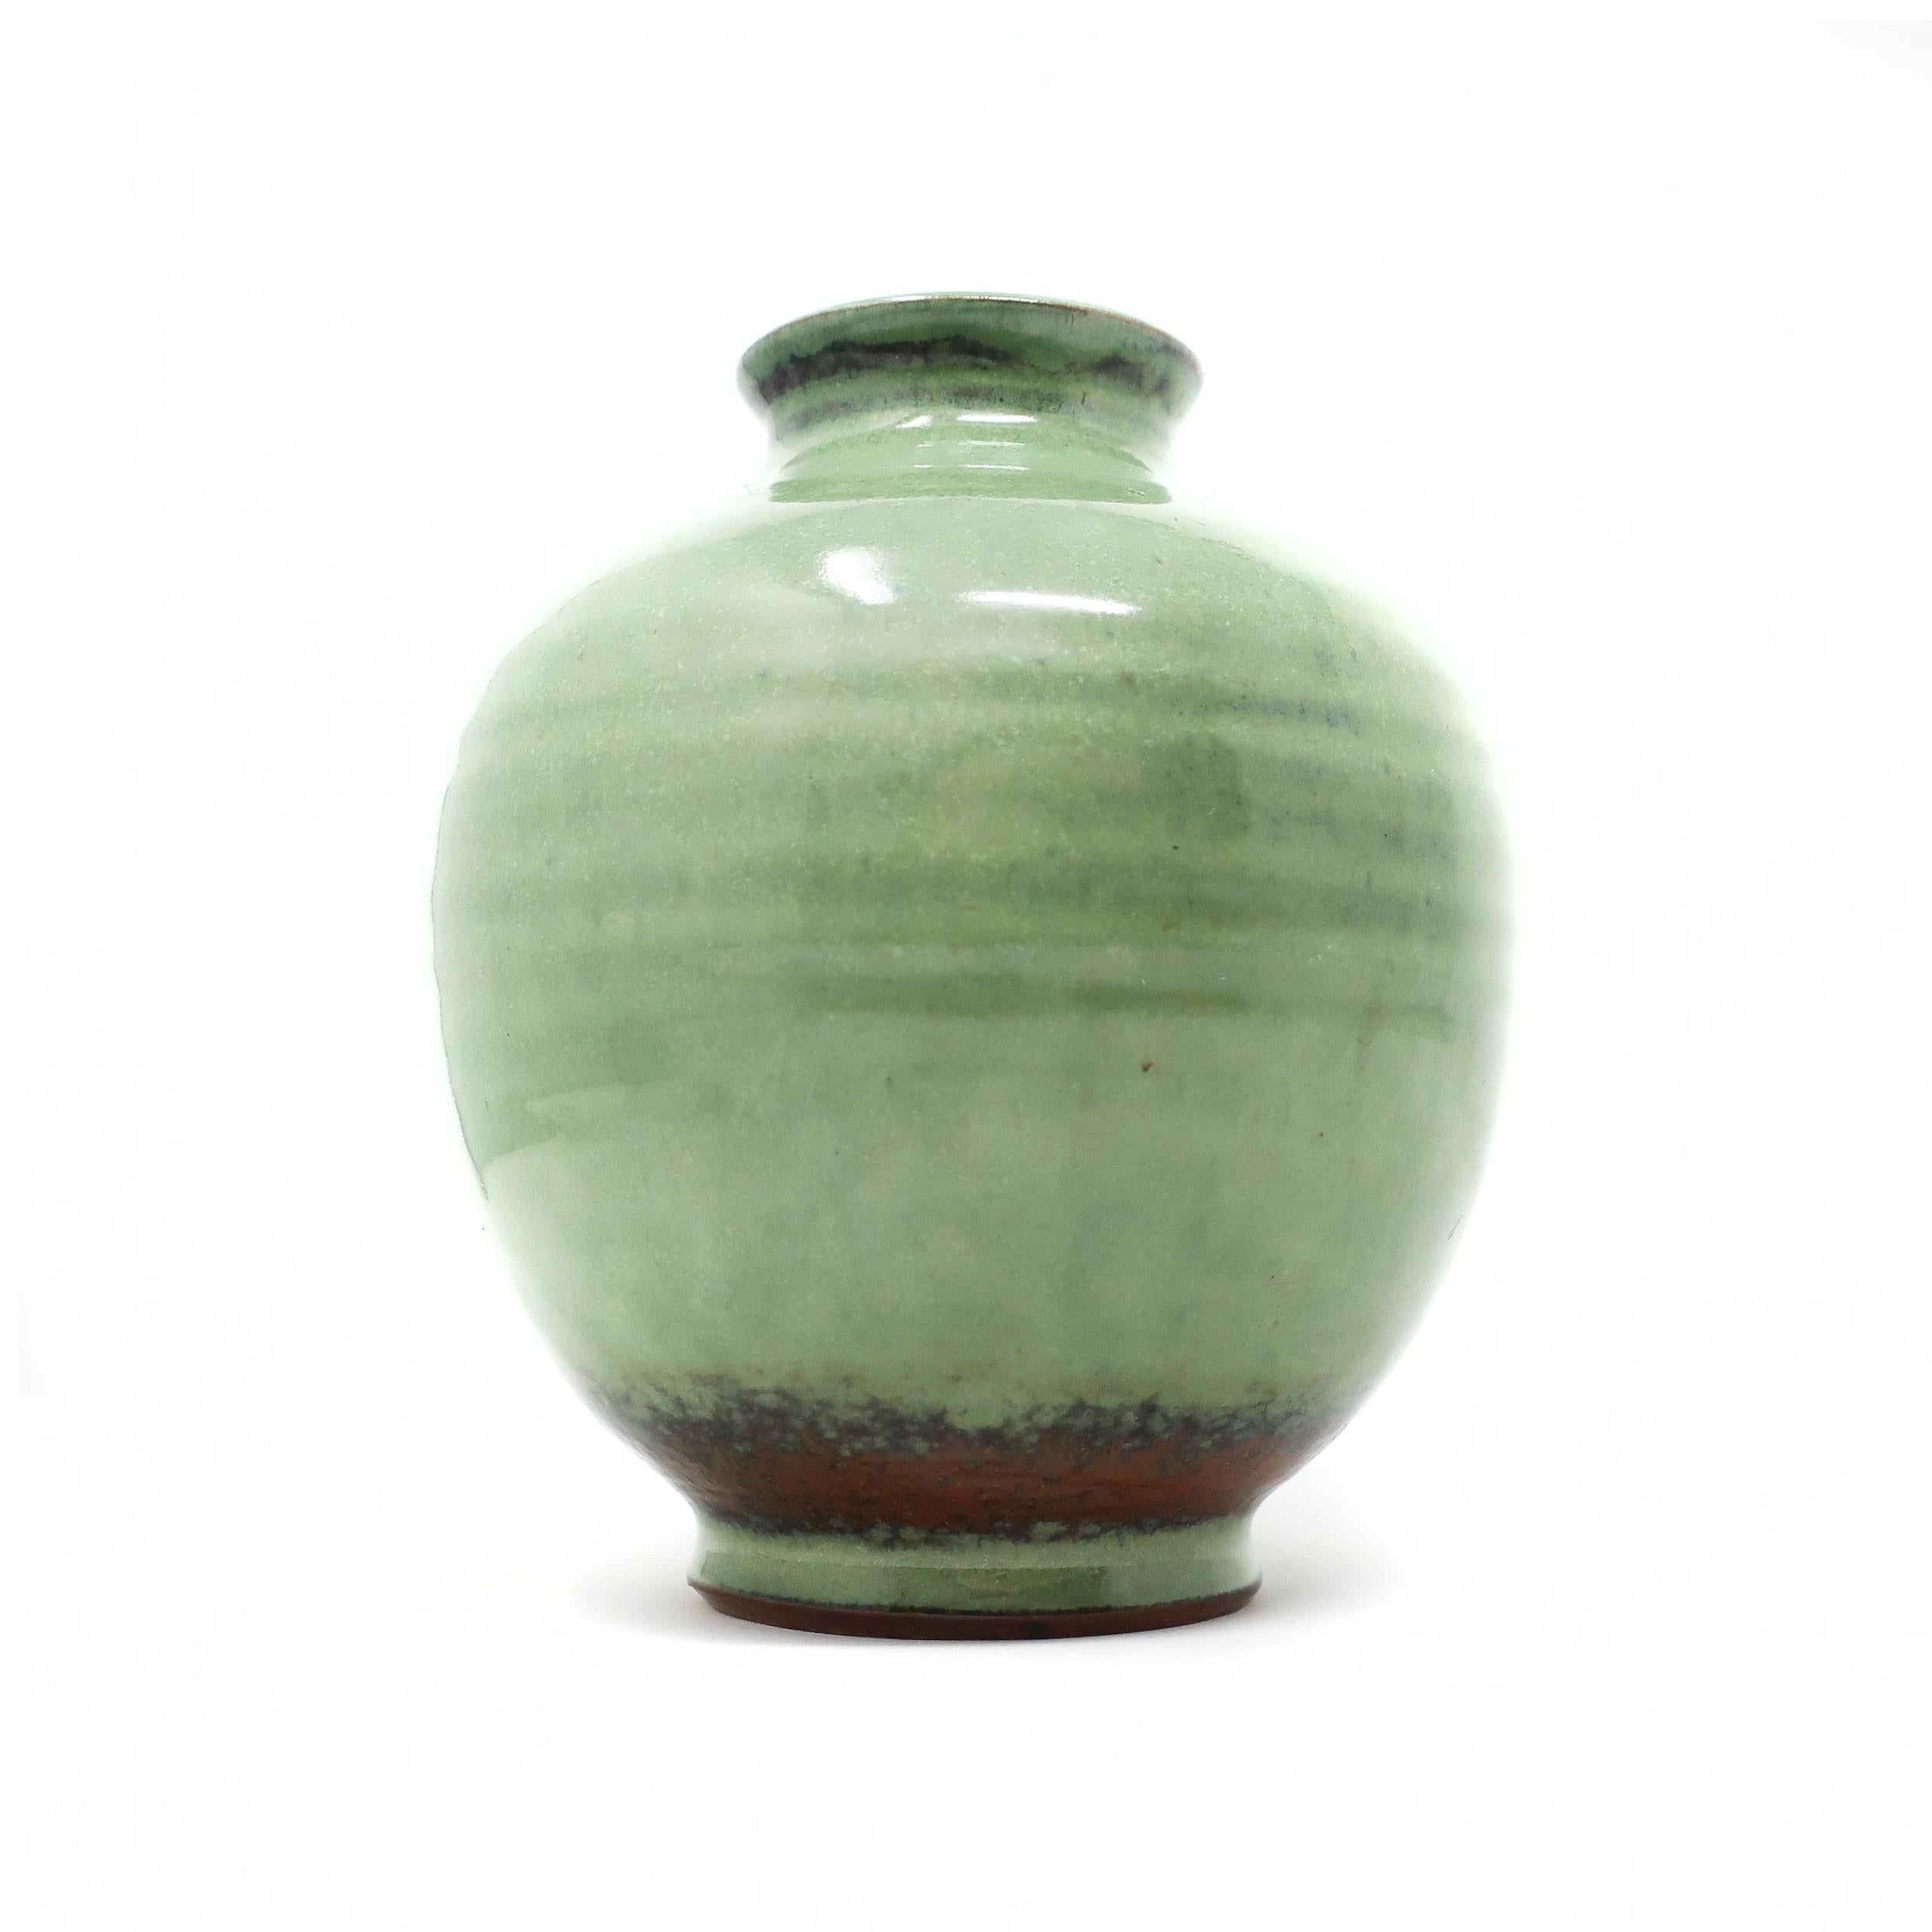 A lovely celadon or greenware ceramic vase by Edwin & Mary Scheier, one of the best known couples to ever work in pottery. Edwin (1910-2008) and Mary (1908-2007)began creating together in the 1930s. This piece has a beautiful light green glaze with